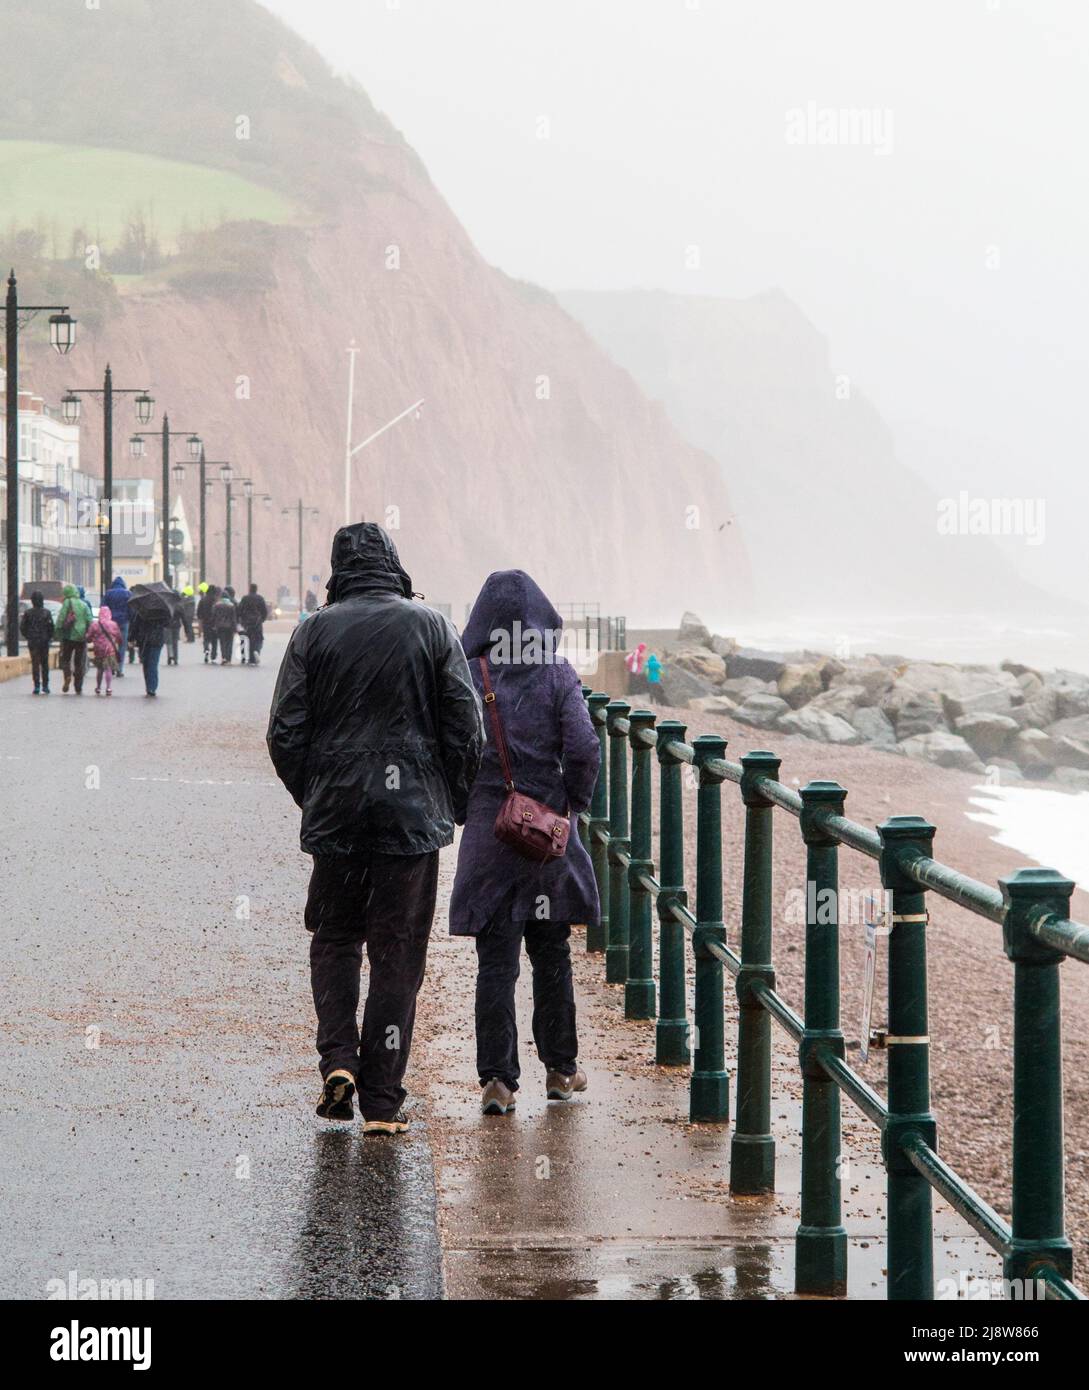 Sidmouth, Devon, England. UK. Rain, stormy seas and gale force winds batter walkers on Sidmouth seafront as astorm approaches Stock Photo